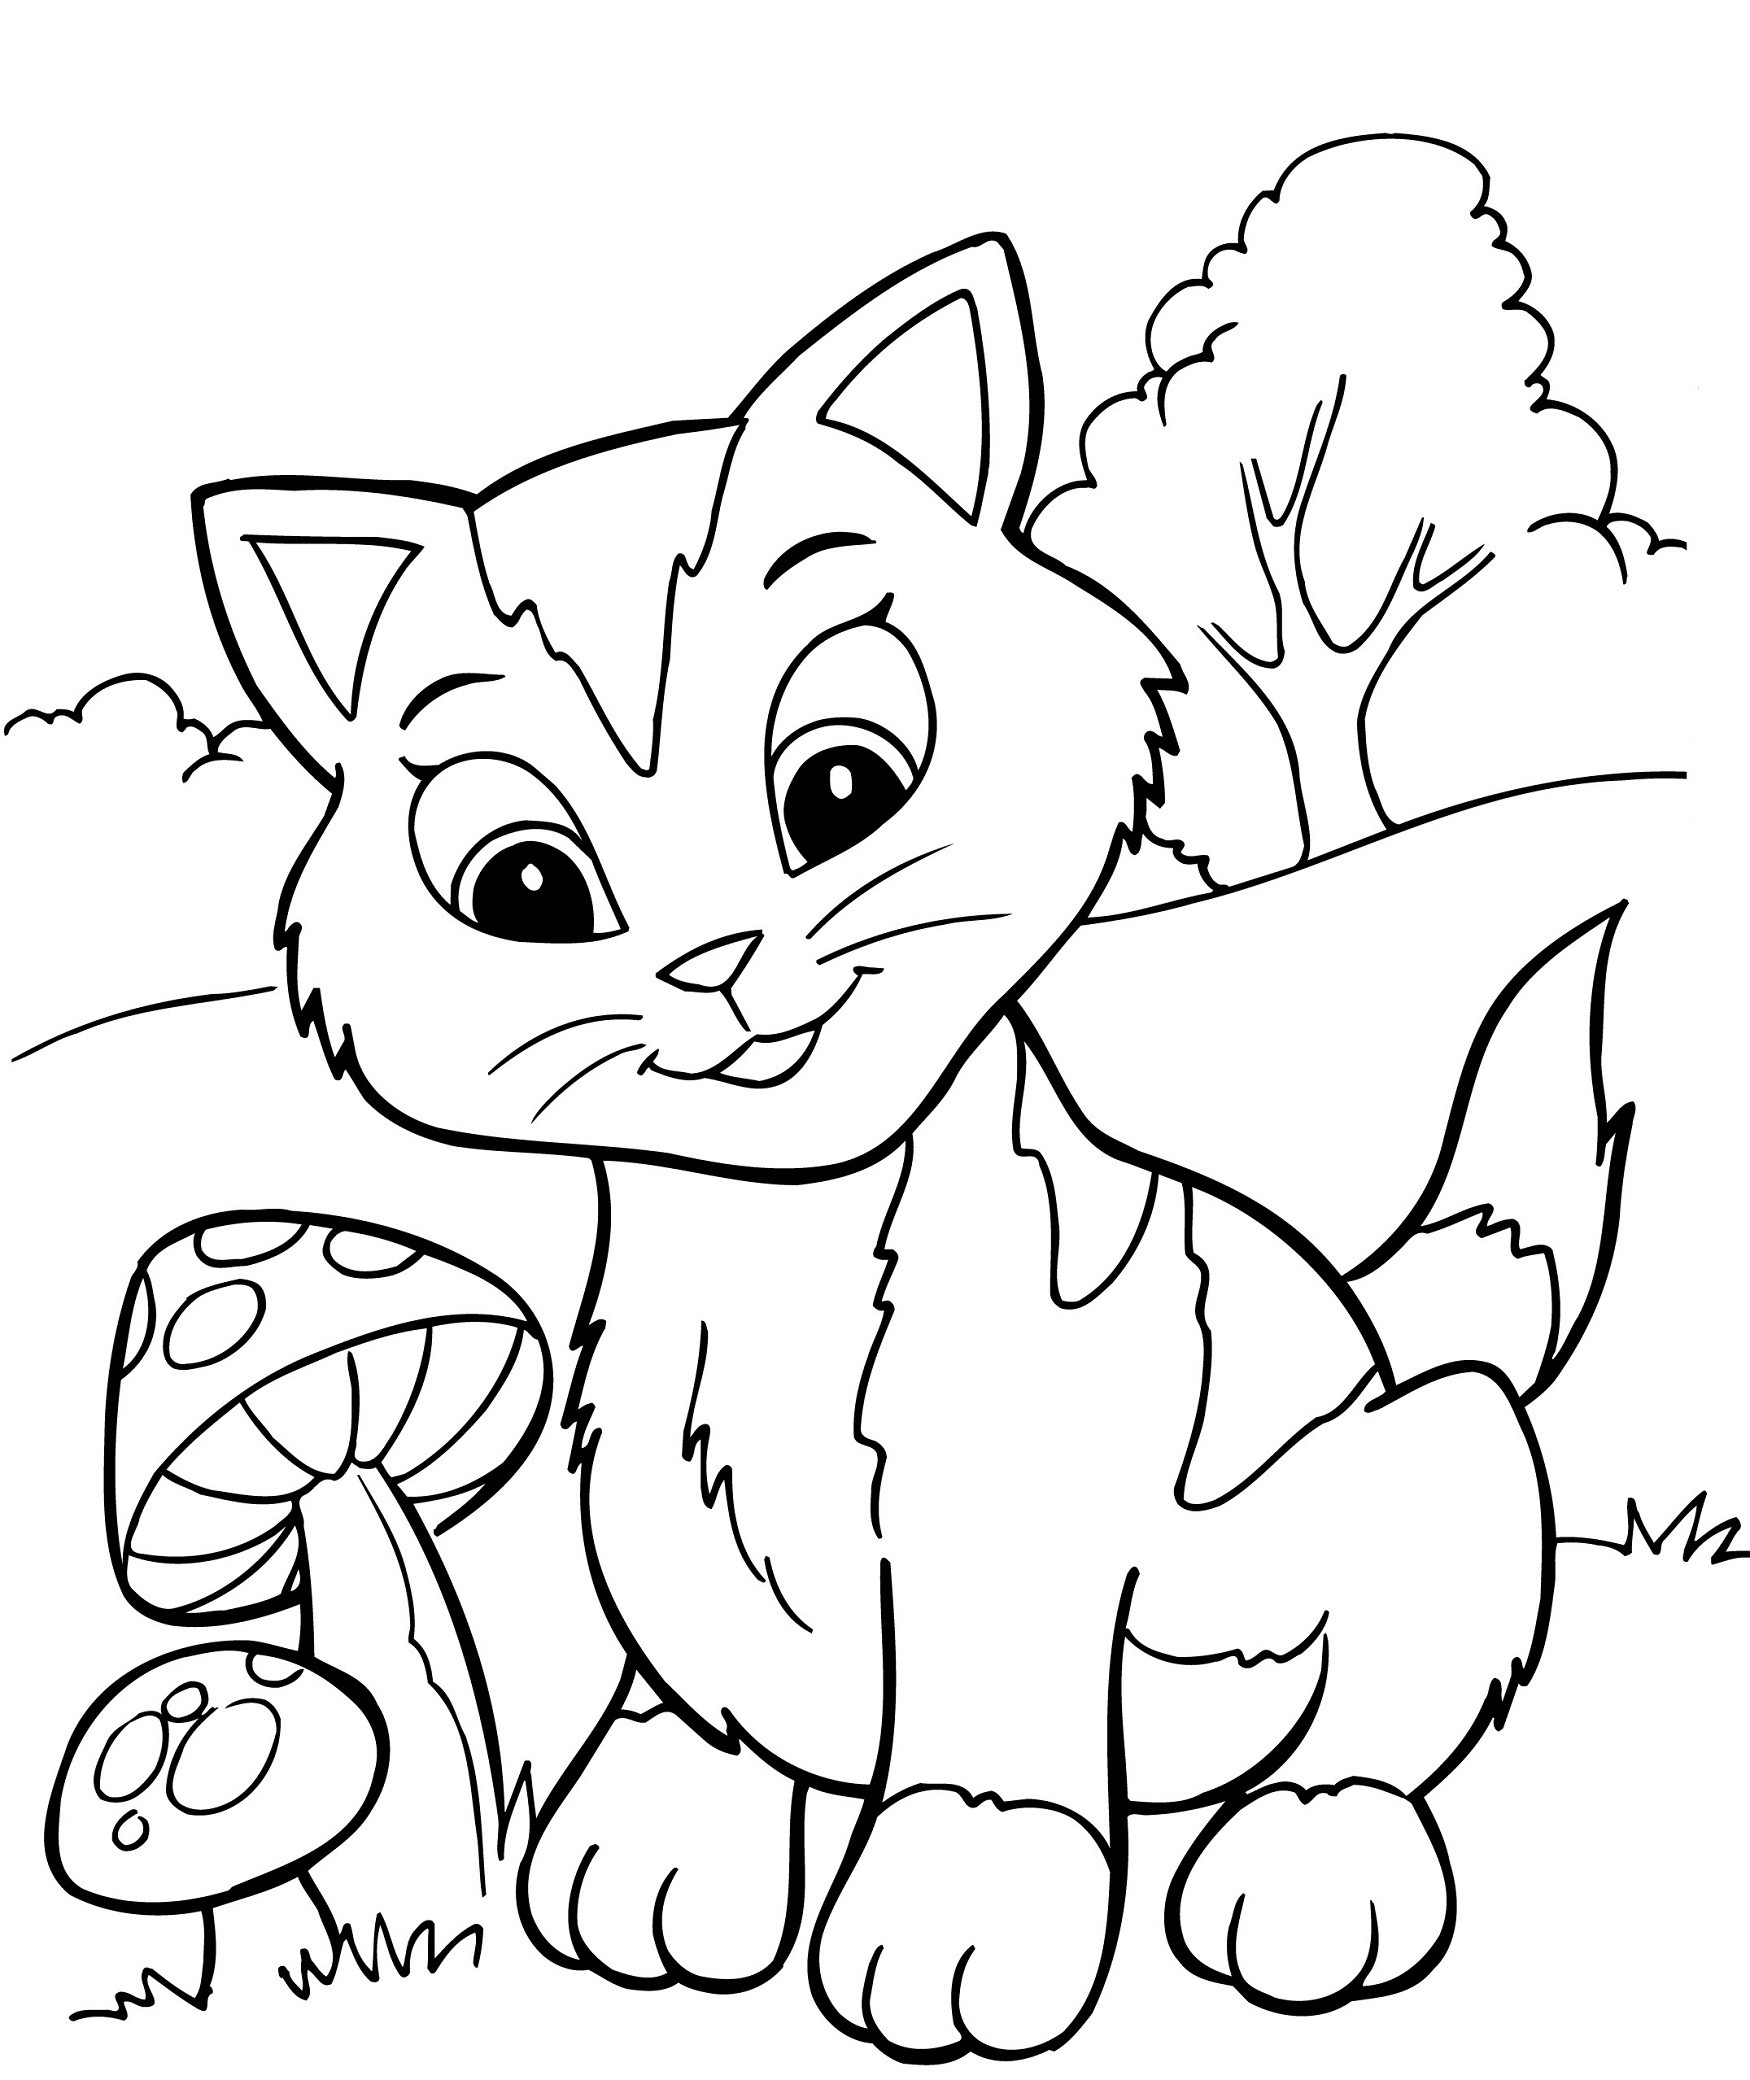 Kids Cat Coloring Pages
 Free Printable Kitten Coloring Pages For Kids Best